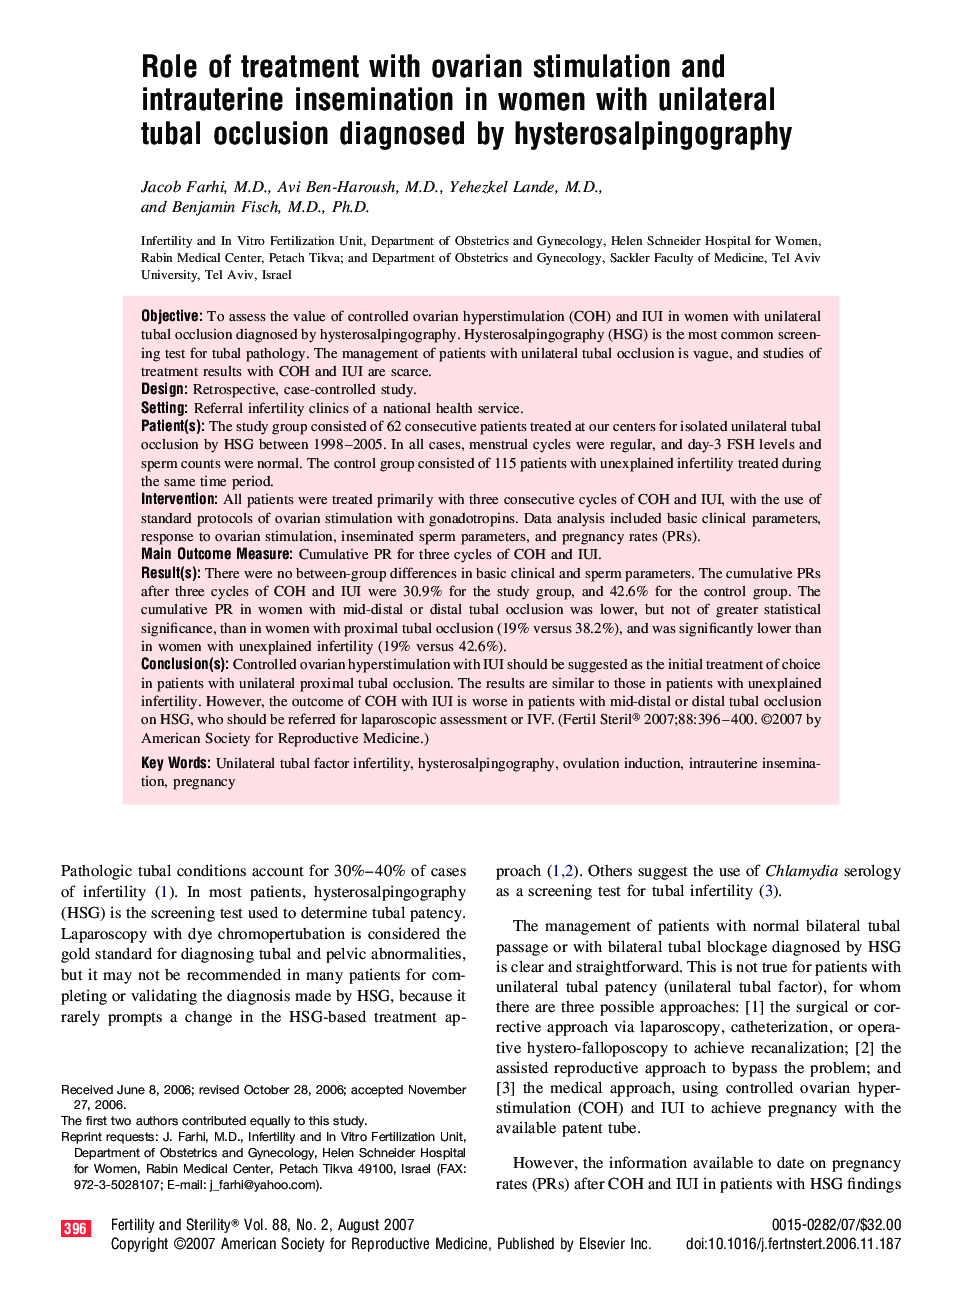 Role of treatment with ovarian stimulation and intrauterine insemination in women with unilateral tubal occlusion diagnosed by hysterosalpingography